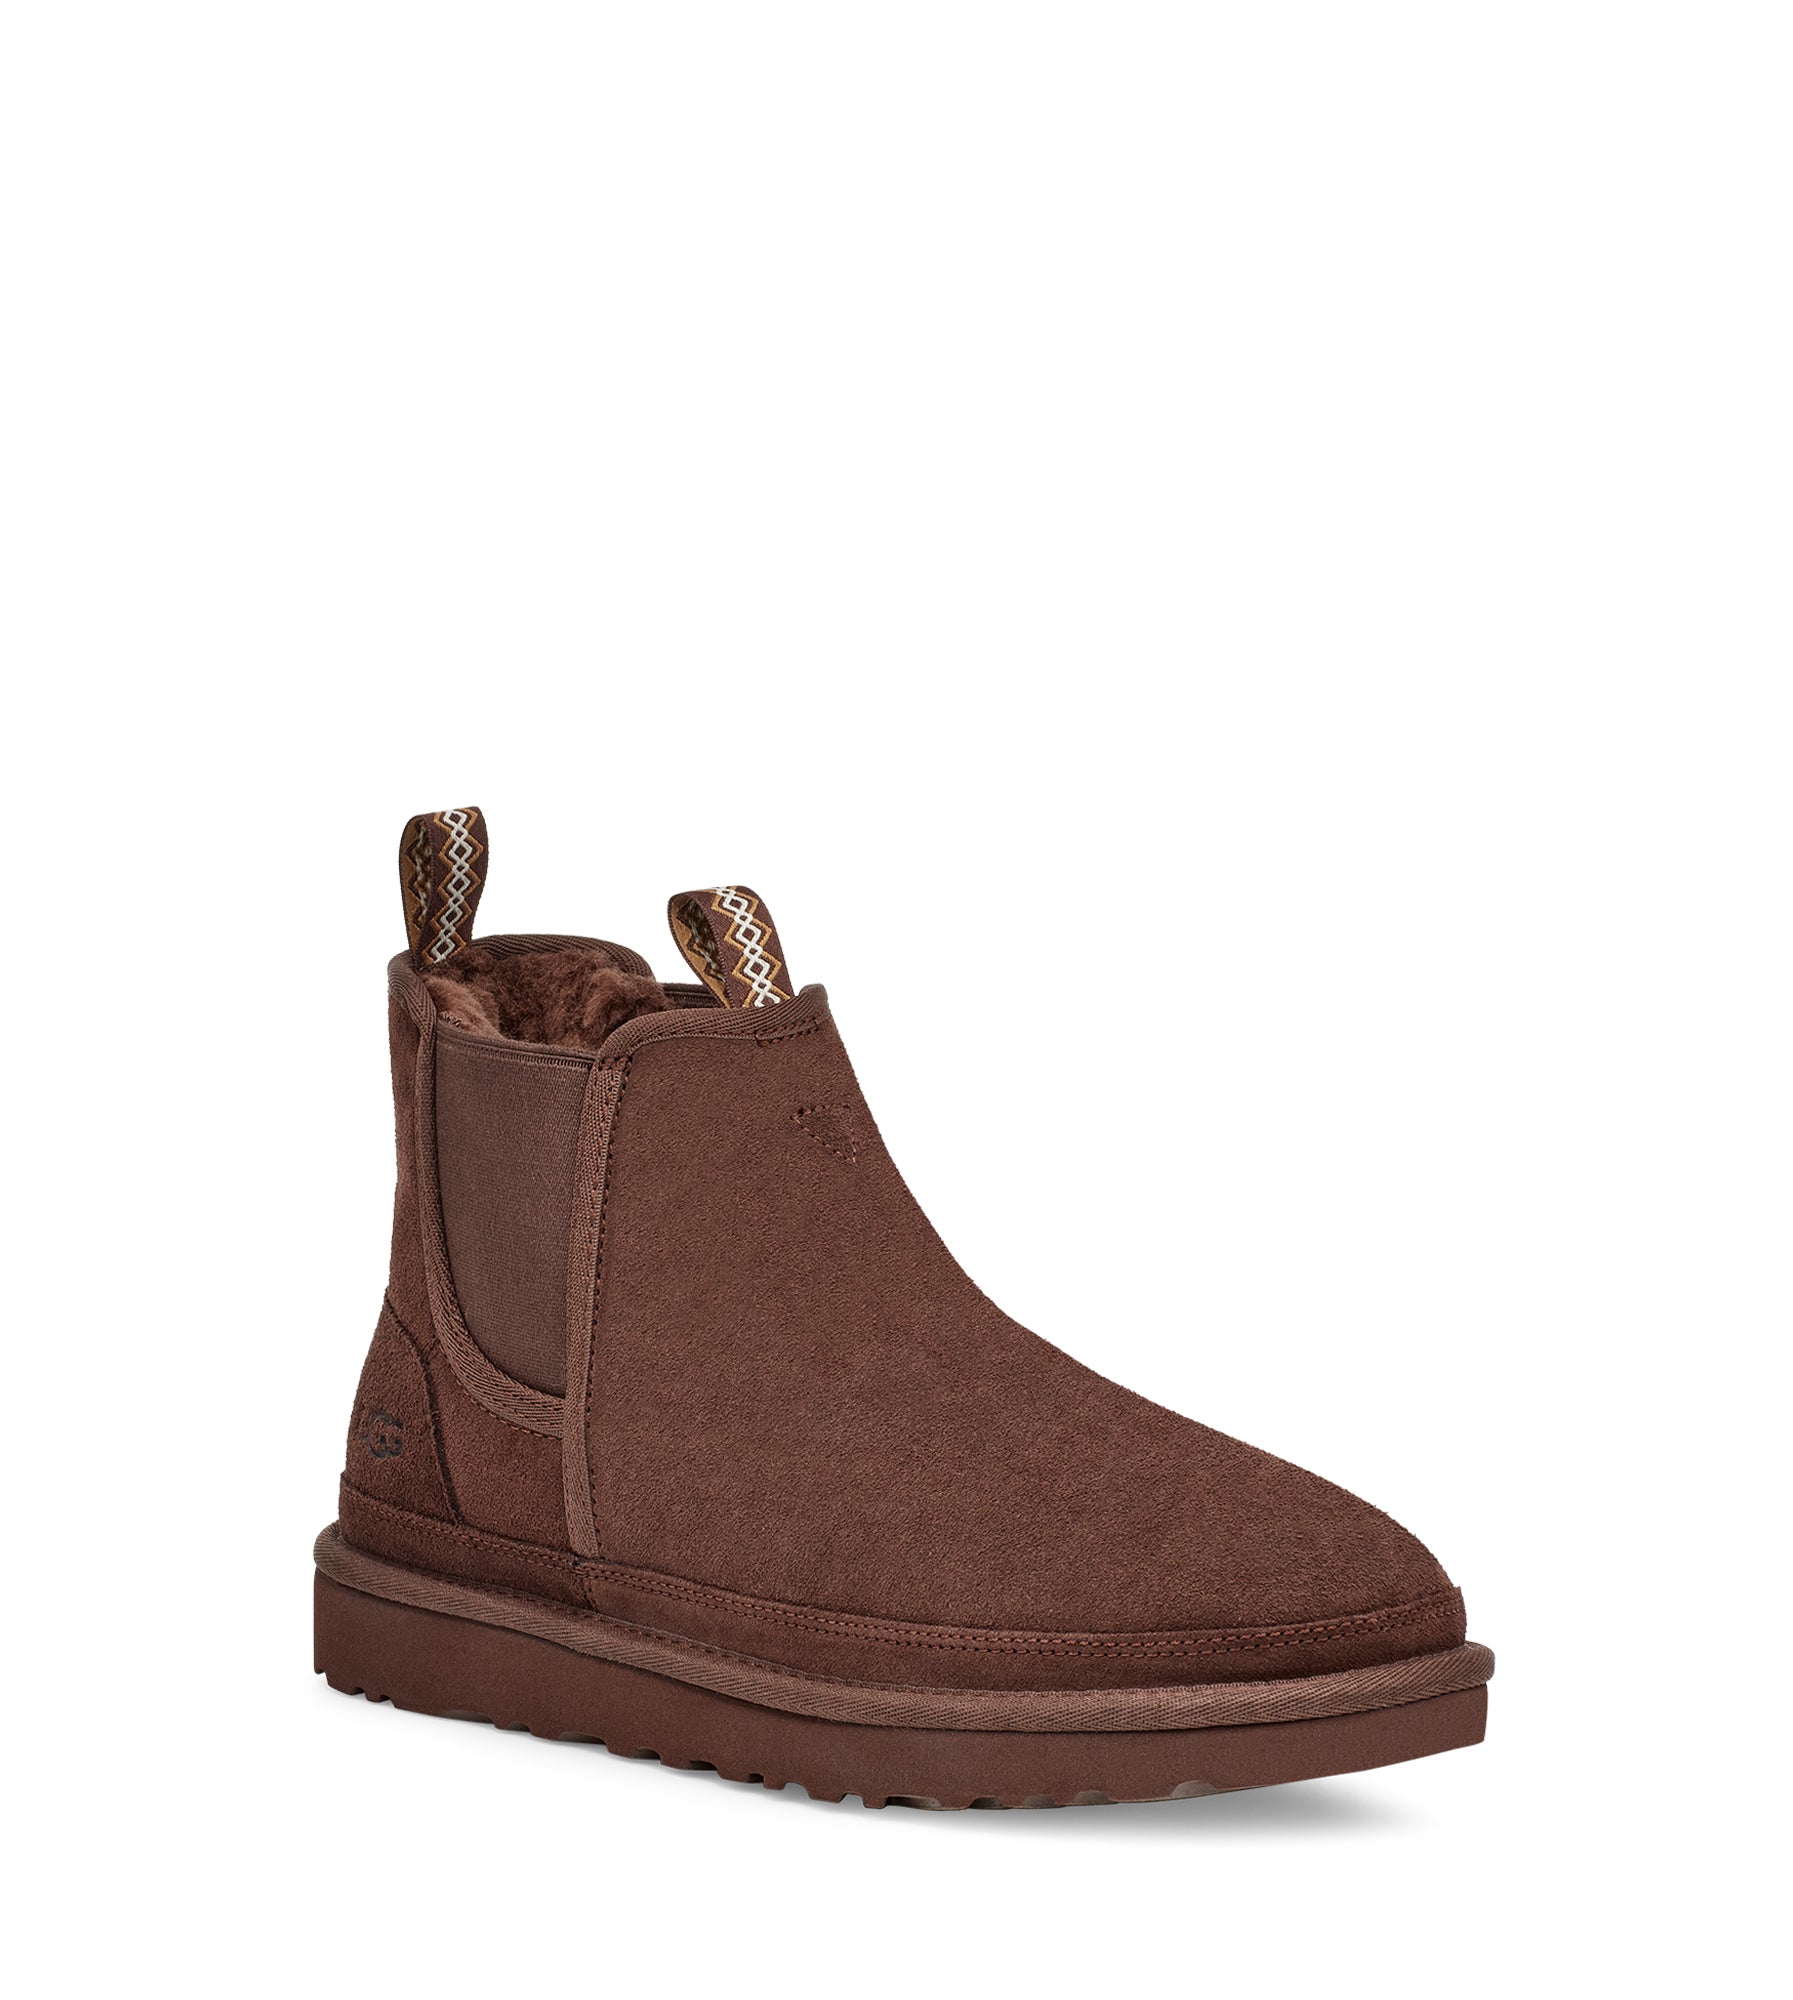 The Men's Neumel Chelsea from Ugg combines premium materials and effortless style. Made of rich suede, it's lined in a wool blend and finished with a durable Treadlite by UGG sole offering lightweight comfort and a flexible feel wherever you go.